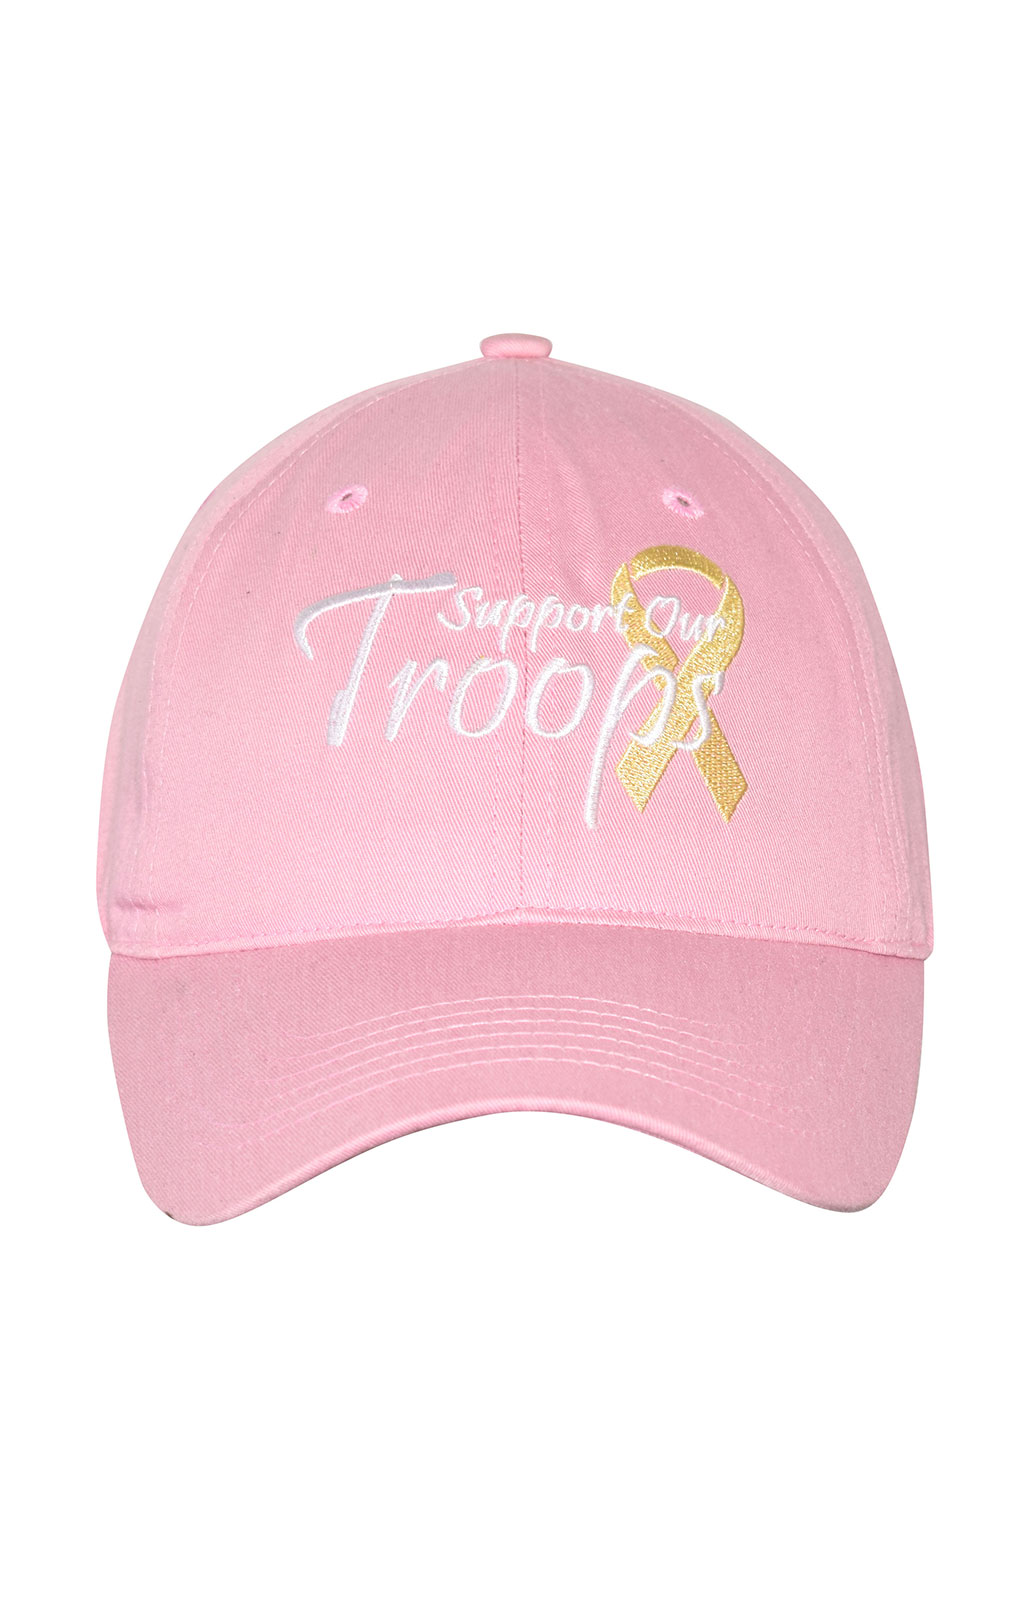 Бейсболка EC SUPPORT OUR TROOPS LADIES pink (5693) 